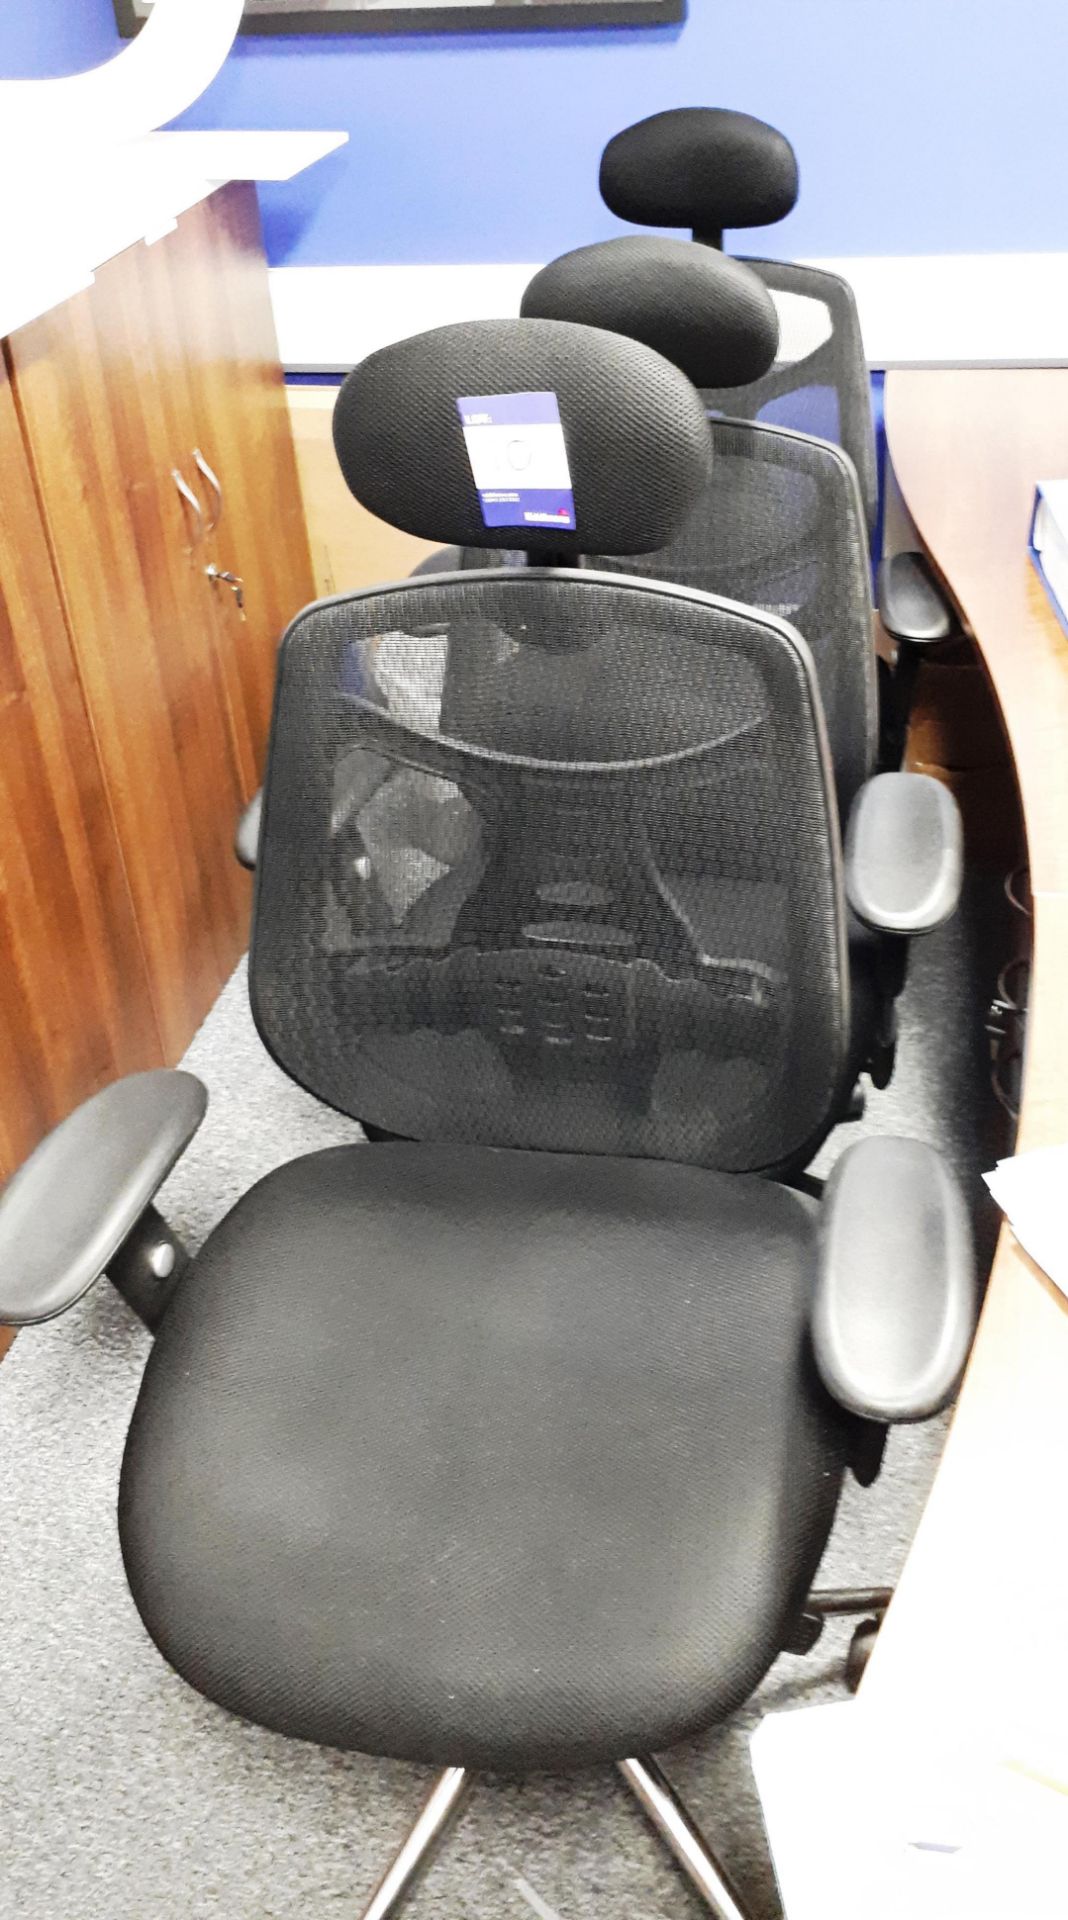 5 mobile swivel chairs black mesh - Image 2 of 2